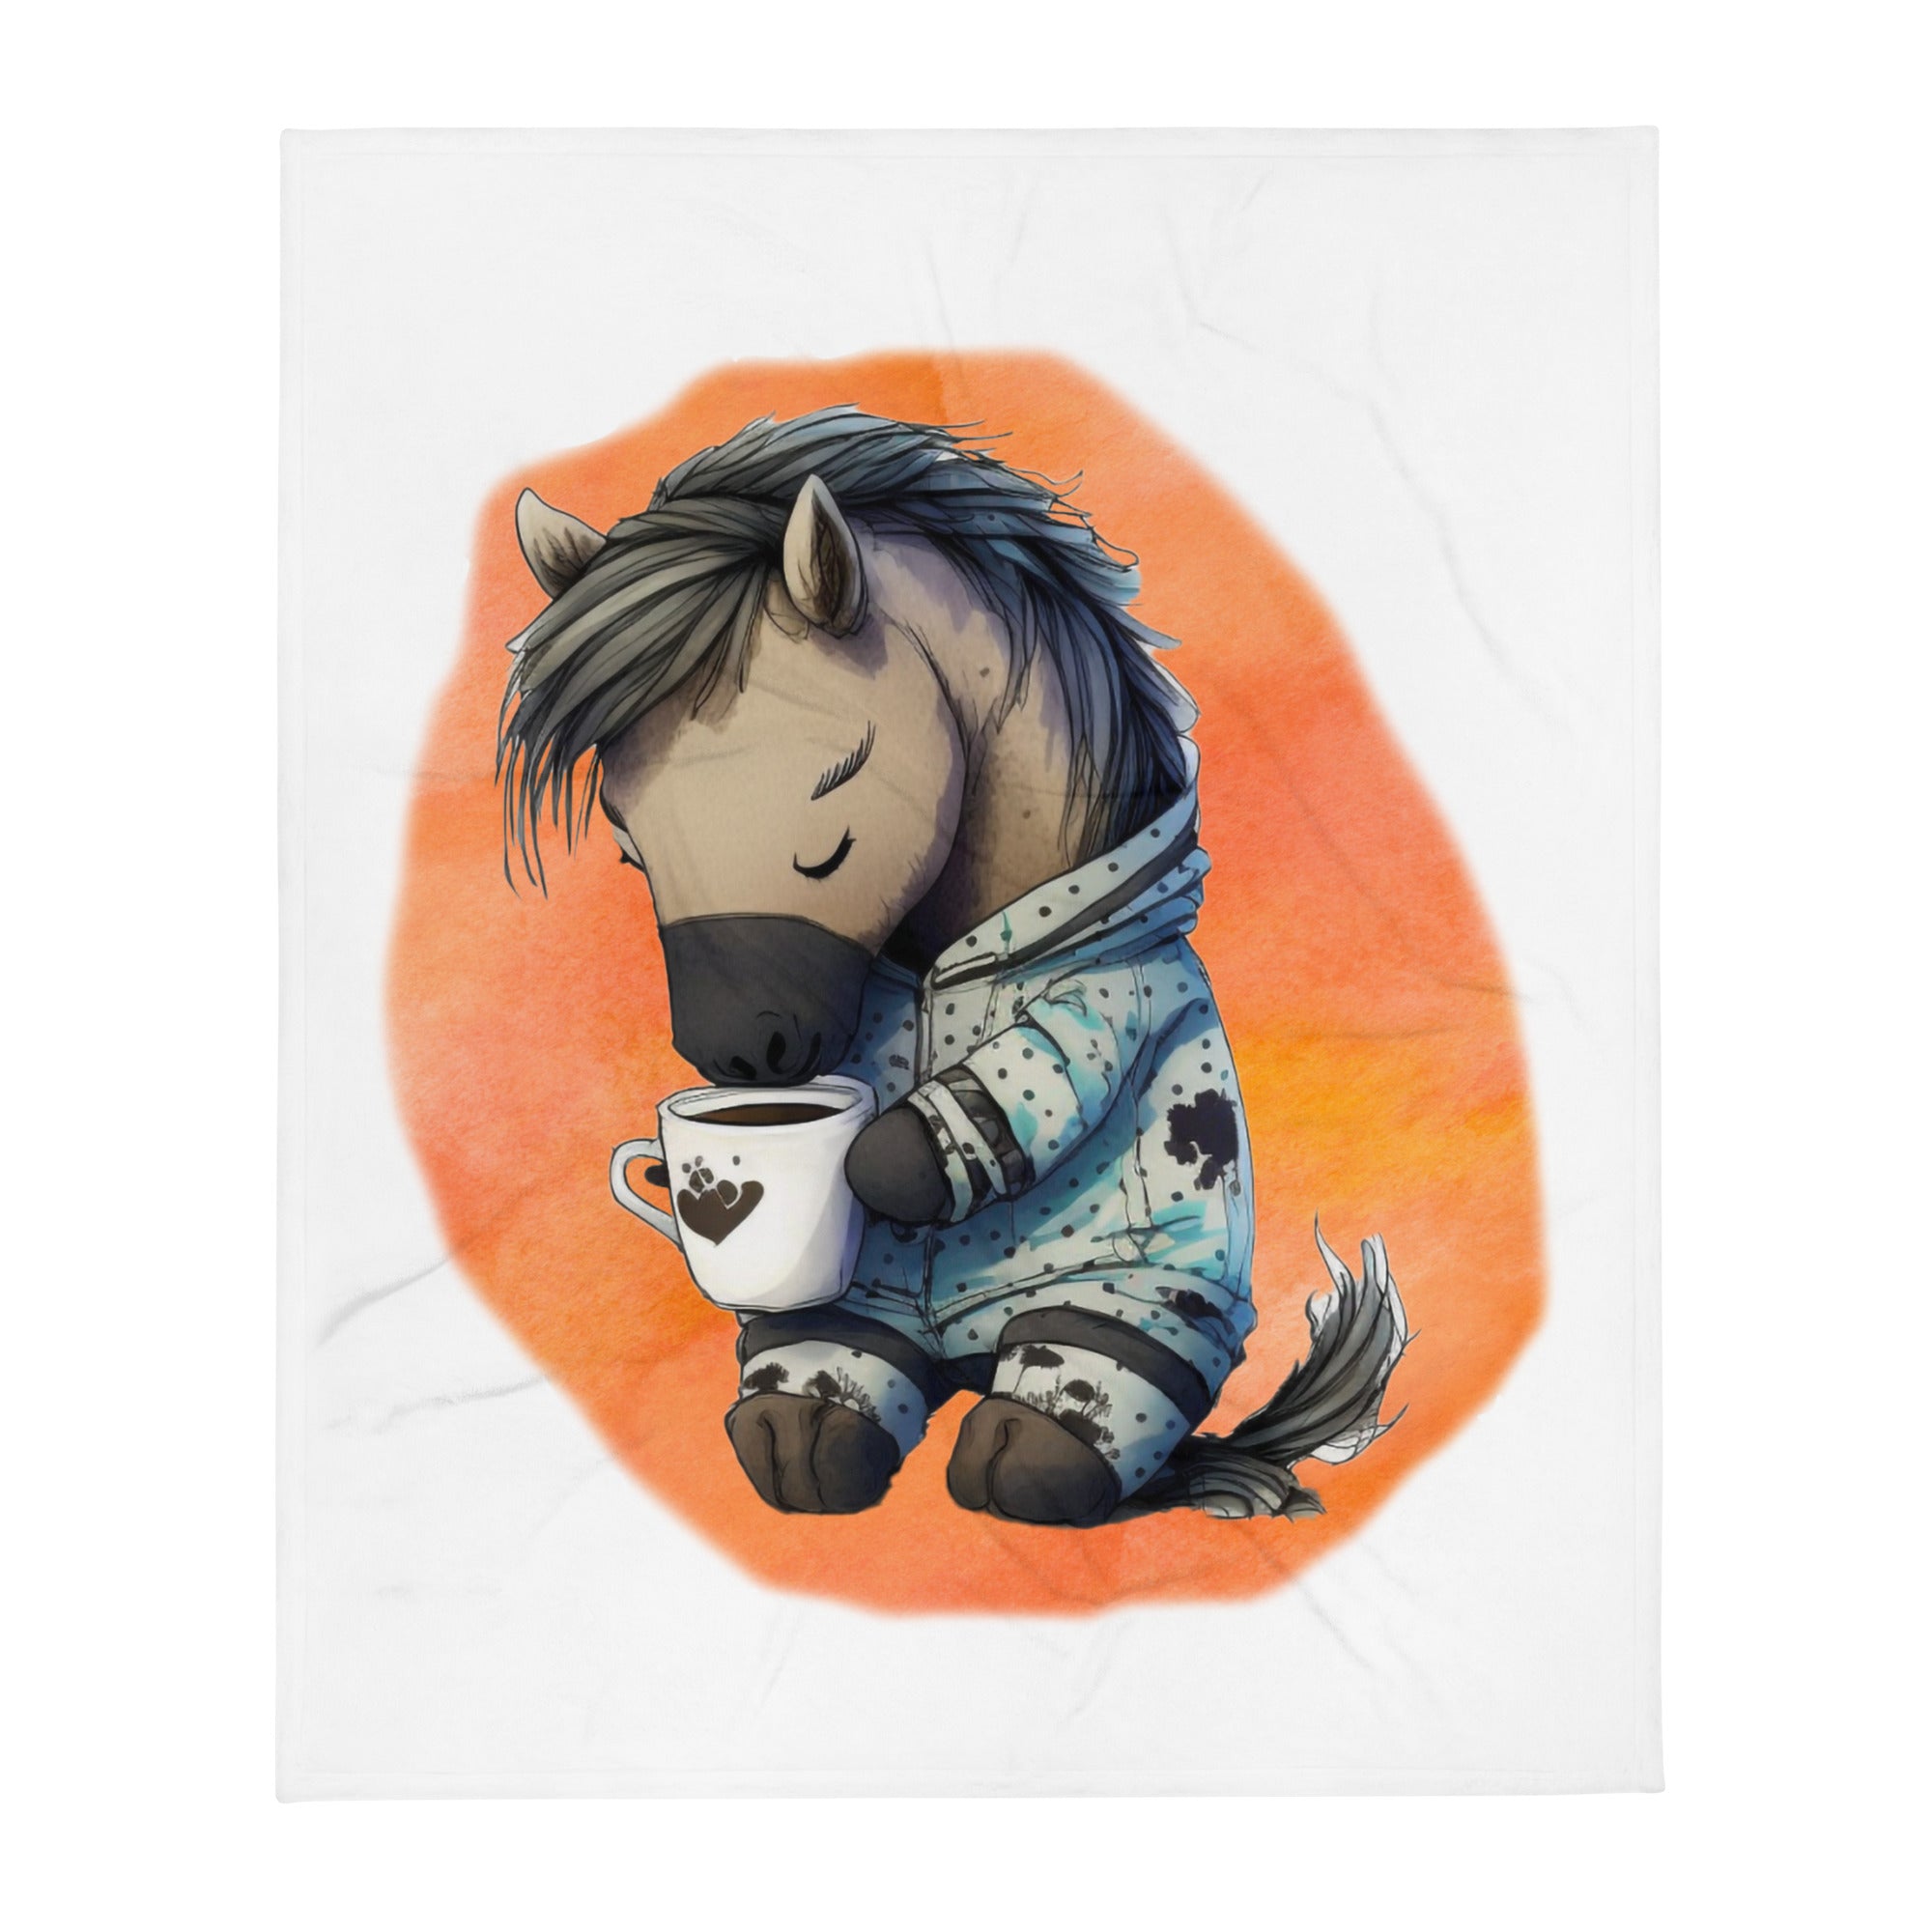 Sleepy Horse 100% Polyester Soft Silk Touch Fabric Throw Blanket - Cozy, Durable and Adorable